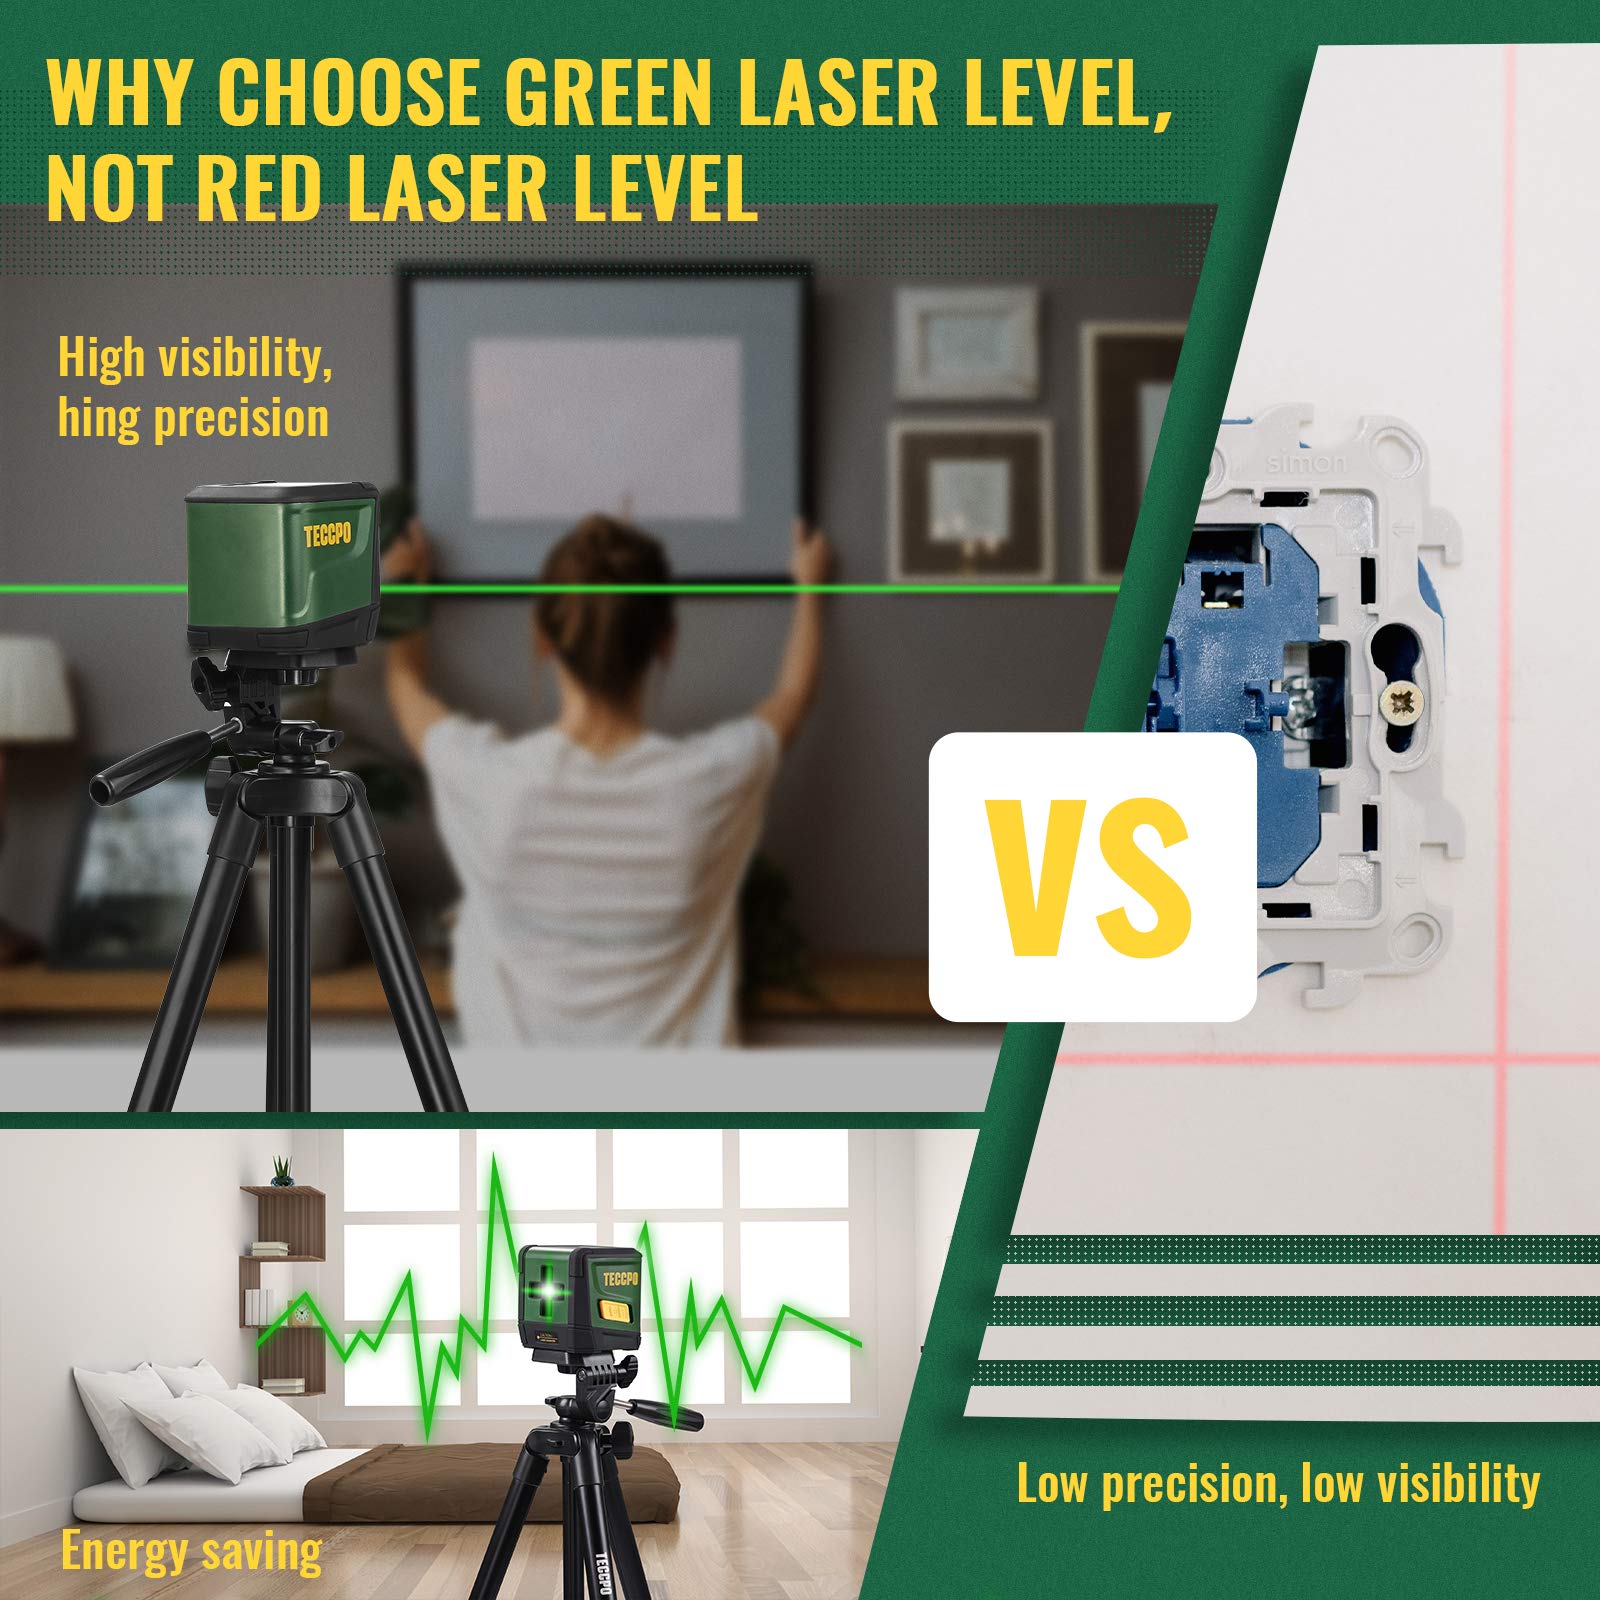 Self-Leveling Laser Level, TECCPO 100ft/30m Green Cross Line Laser, ±3mm/10m Leveling Accuracy, Horizontal and Vertical Line for Construction Picture Hanging, Home Renovation Floor Tile